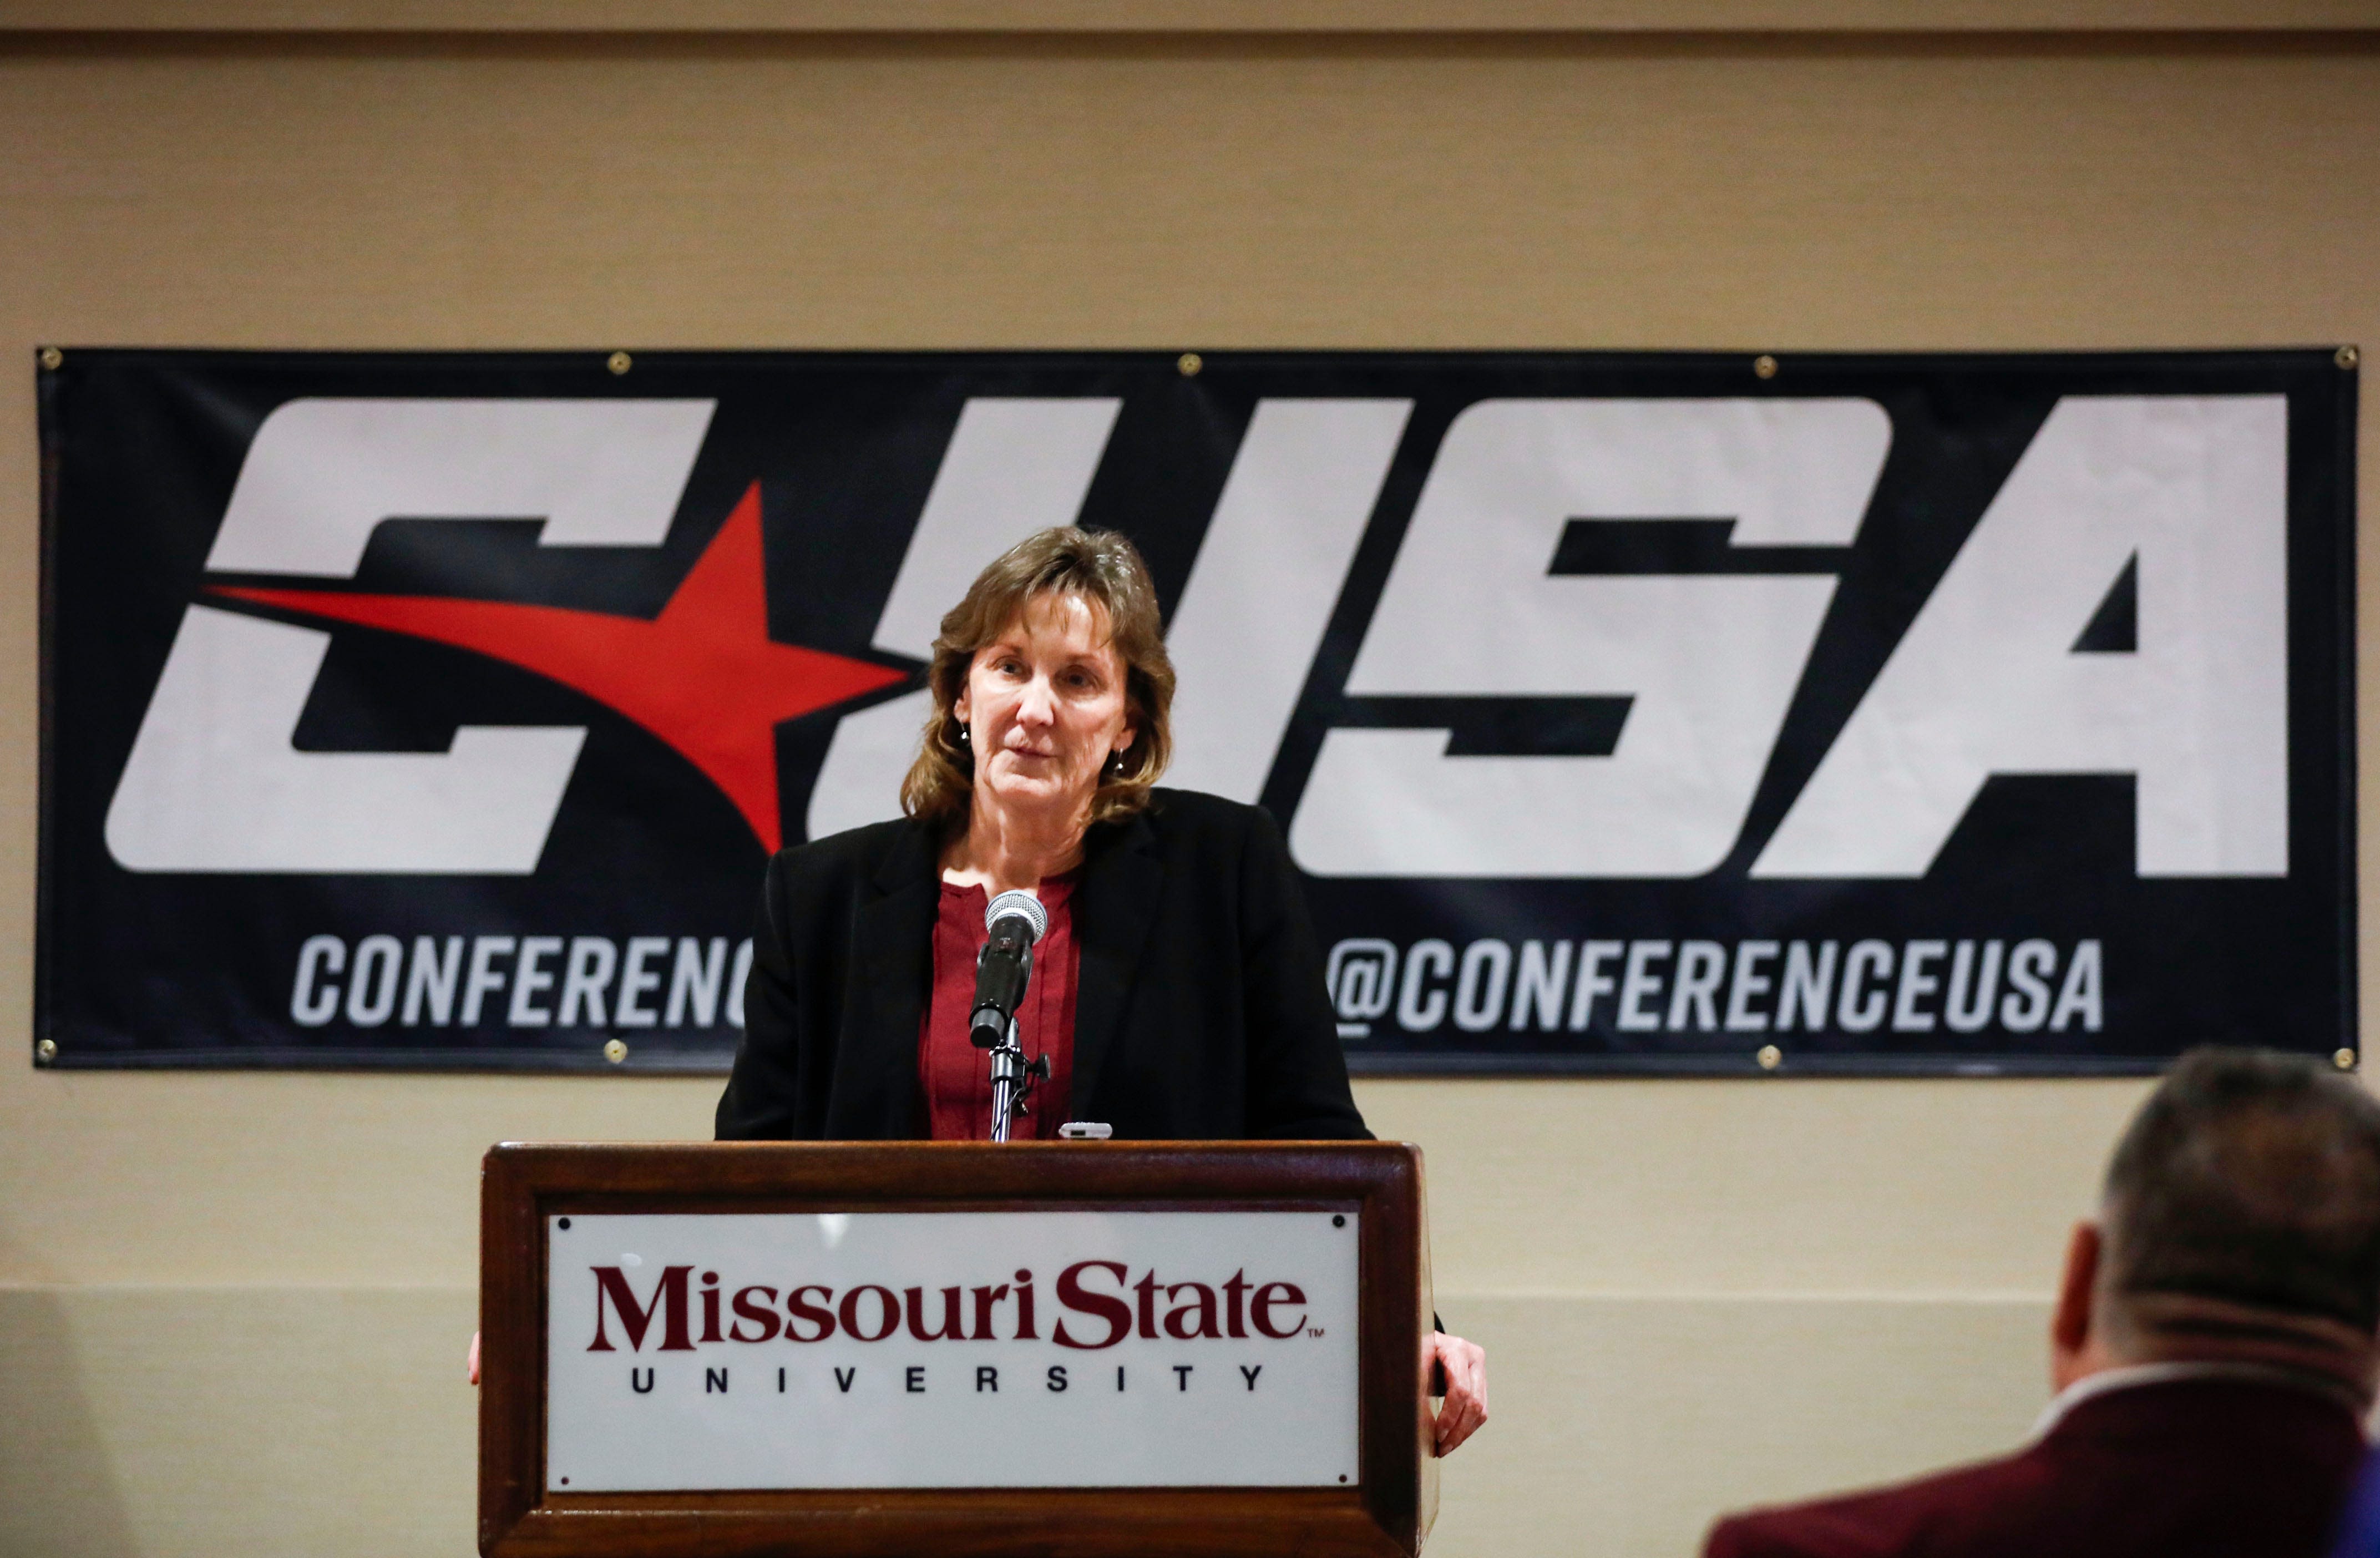 Q&A with Conference USA commissioner Judy MacLeod: Why did CUSA add Missouri State?